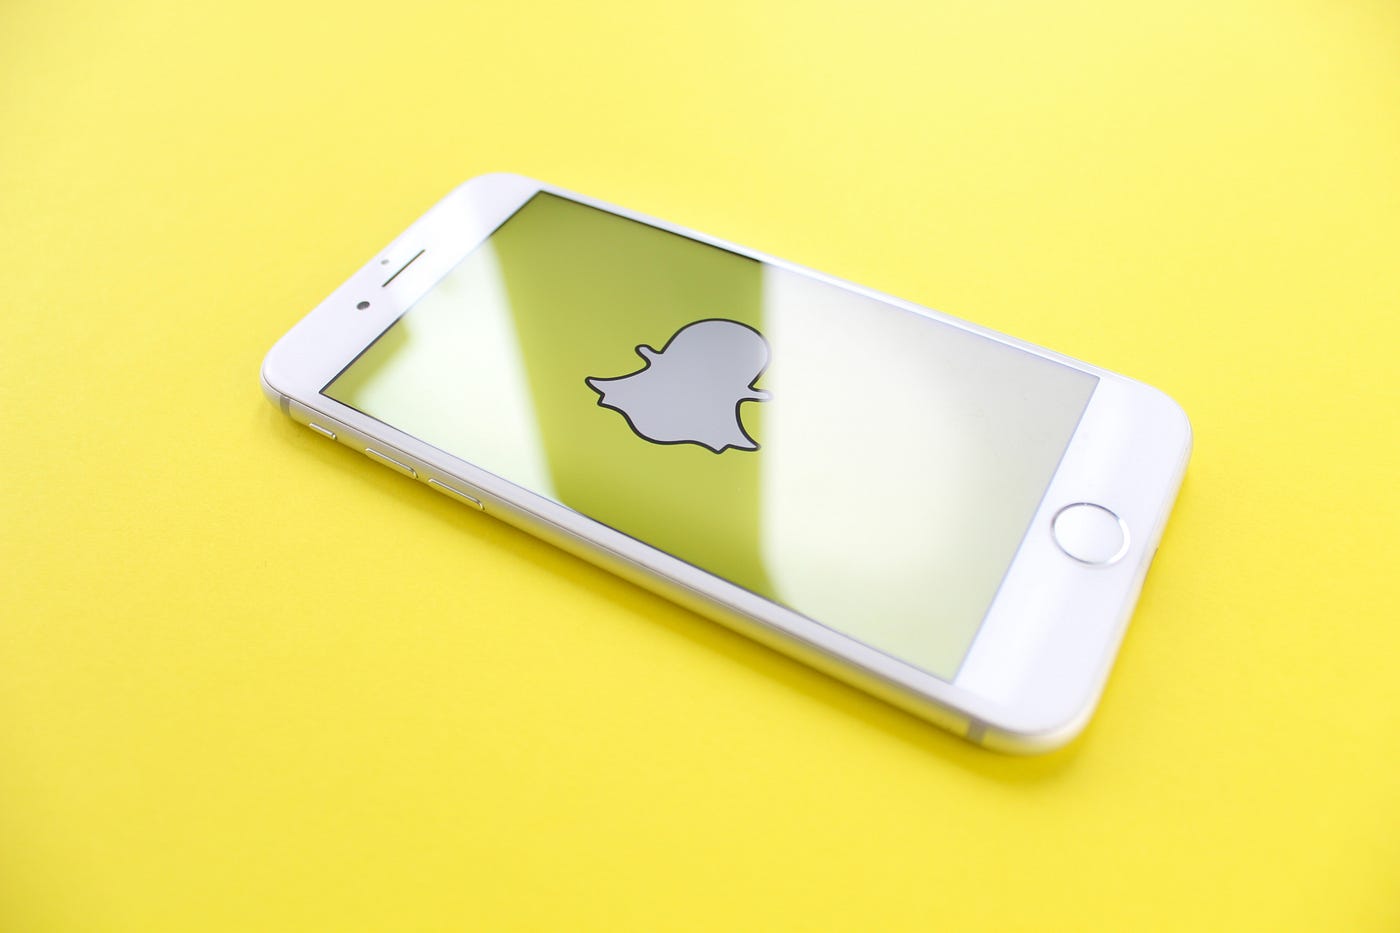 Snapchat Snap Kit SDK Tutorial for iOS Swift, by Bruce Bookman, Adventures in iOS mobile app development